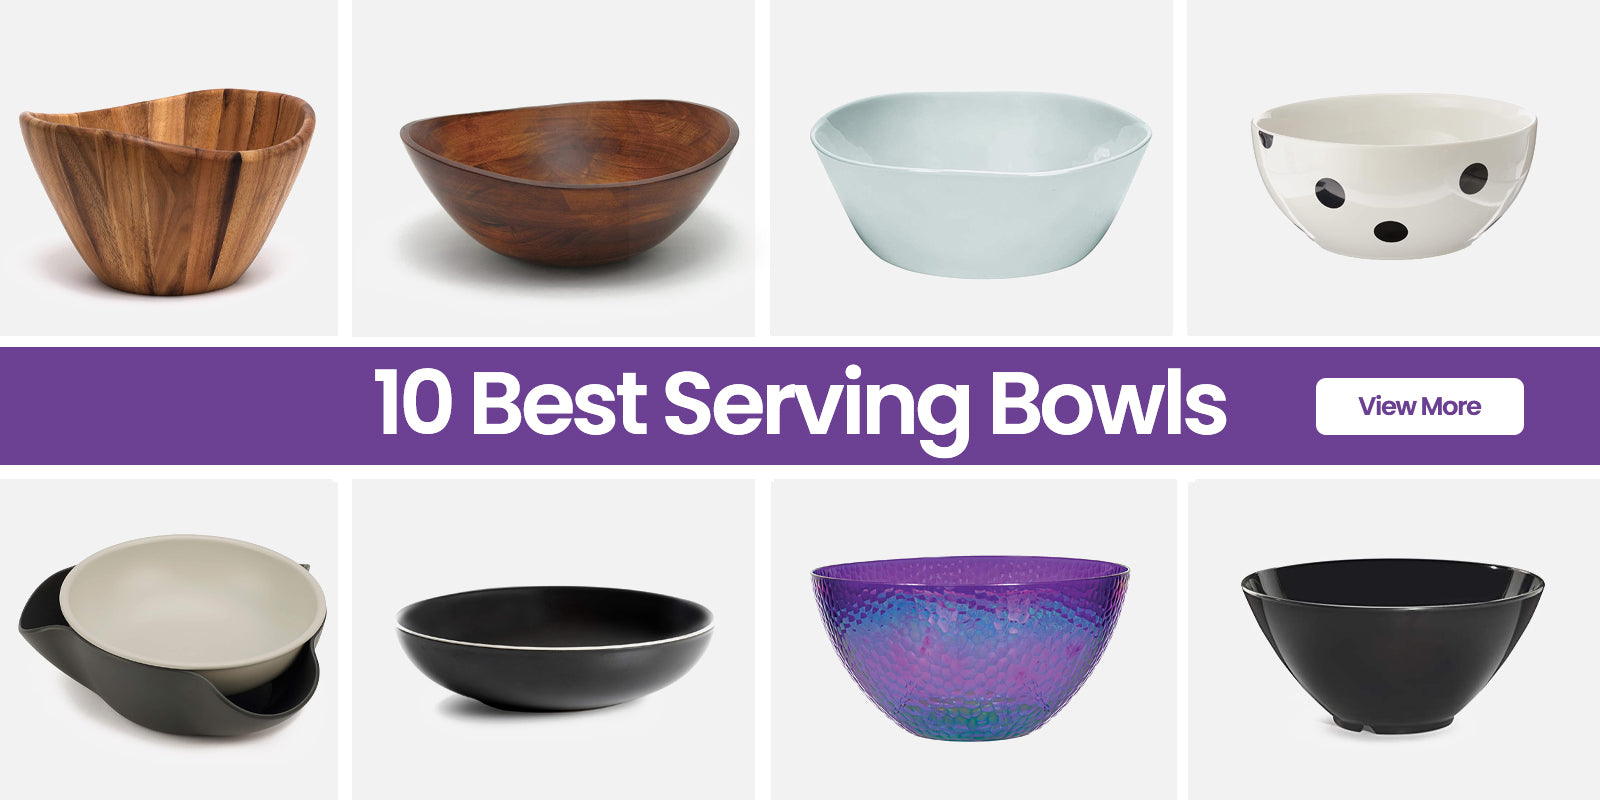 10 Best Insulated Serving Bowls 2019 